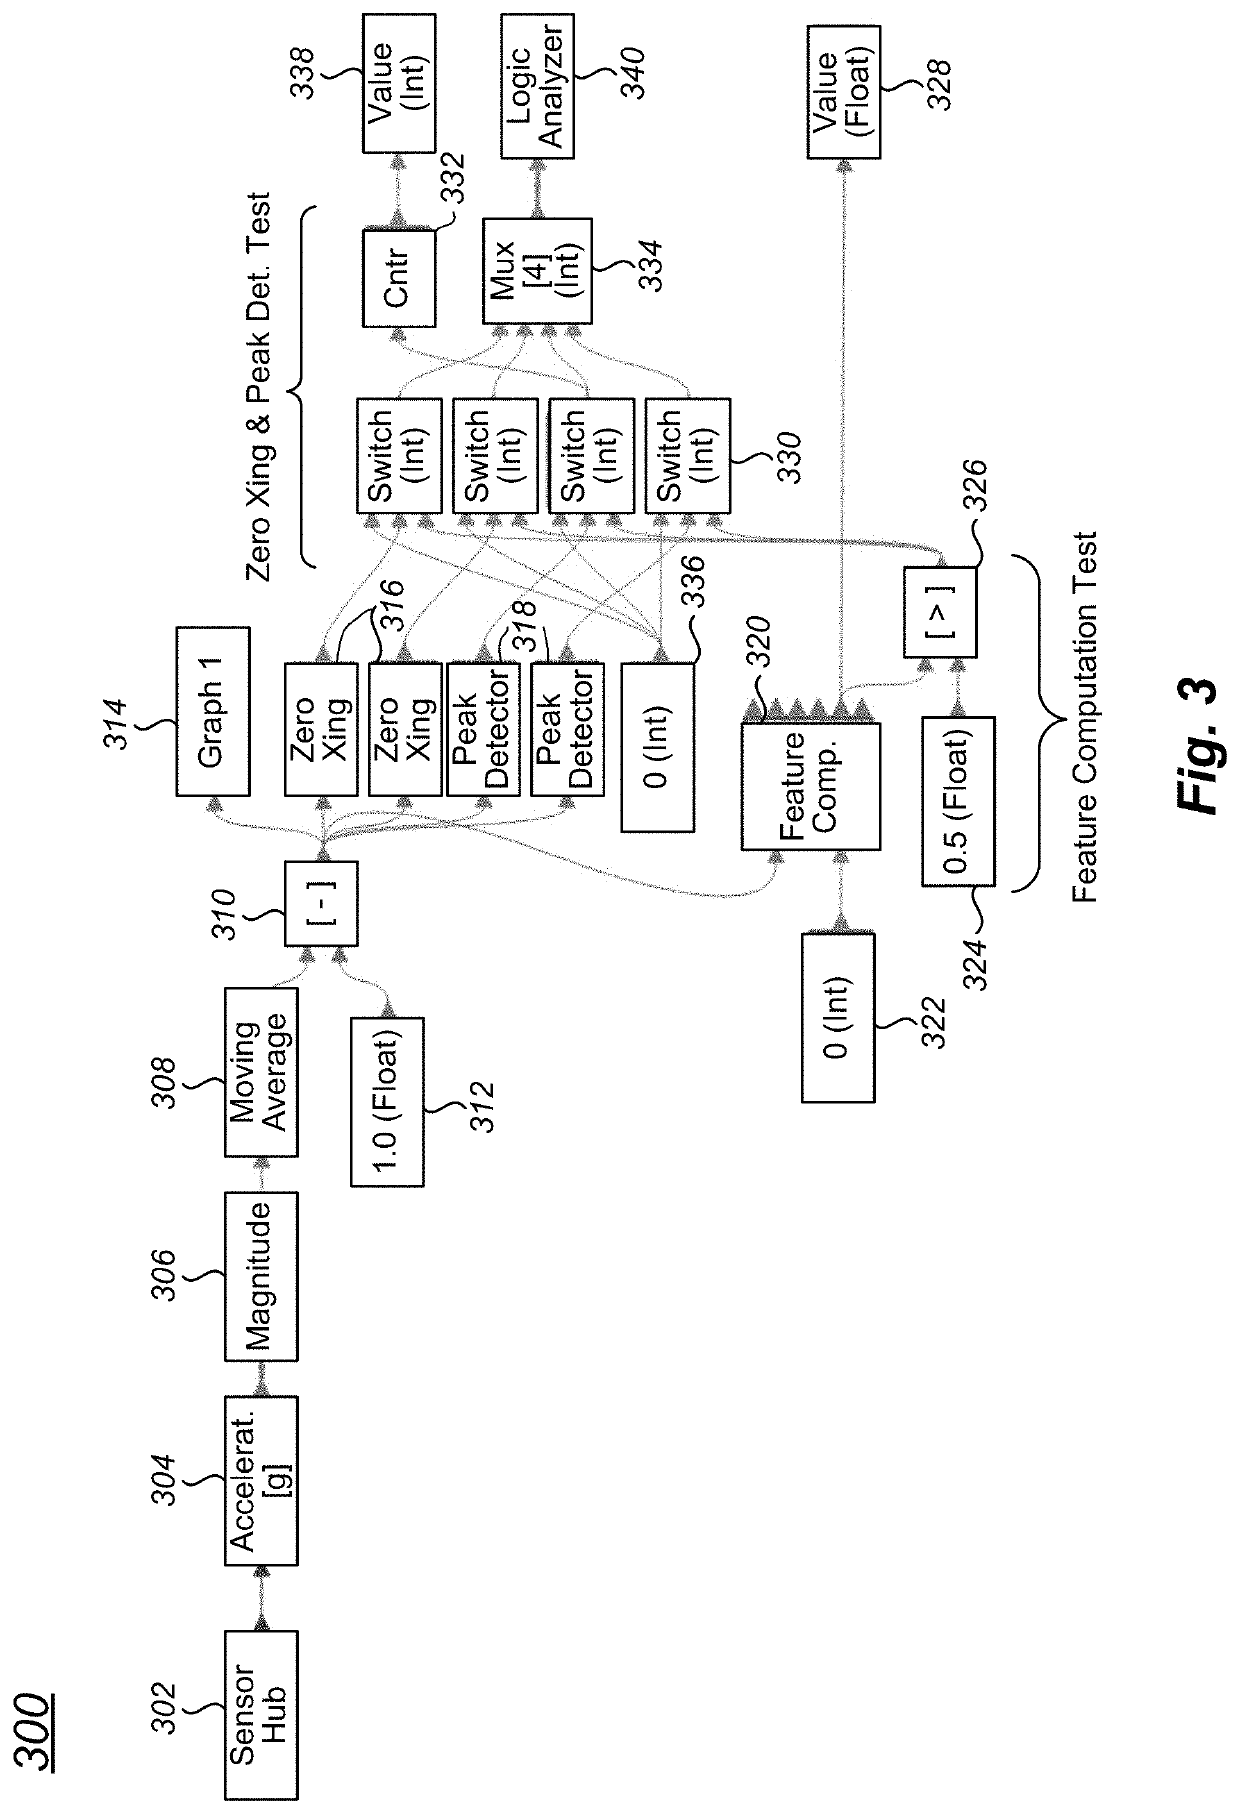 Method and apparatus for quick prototyping of embedded peripherals